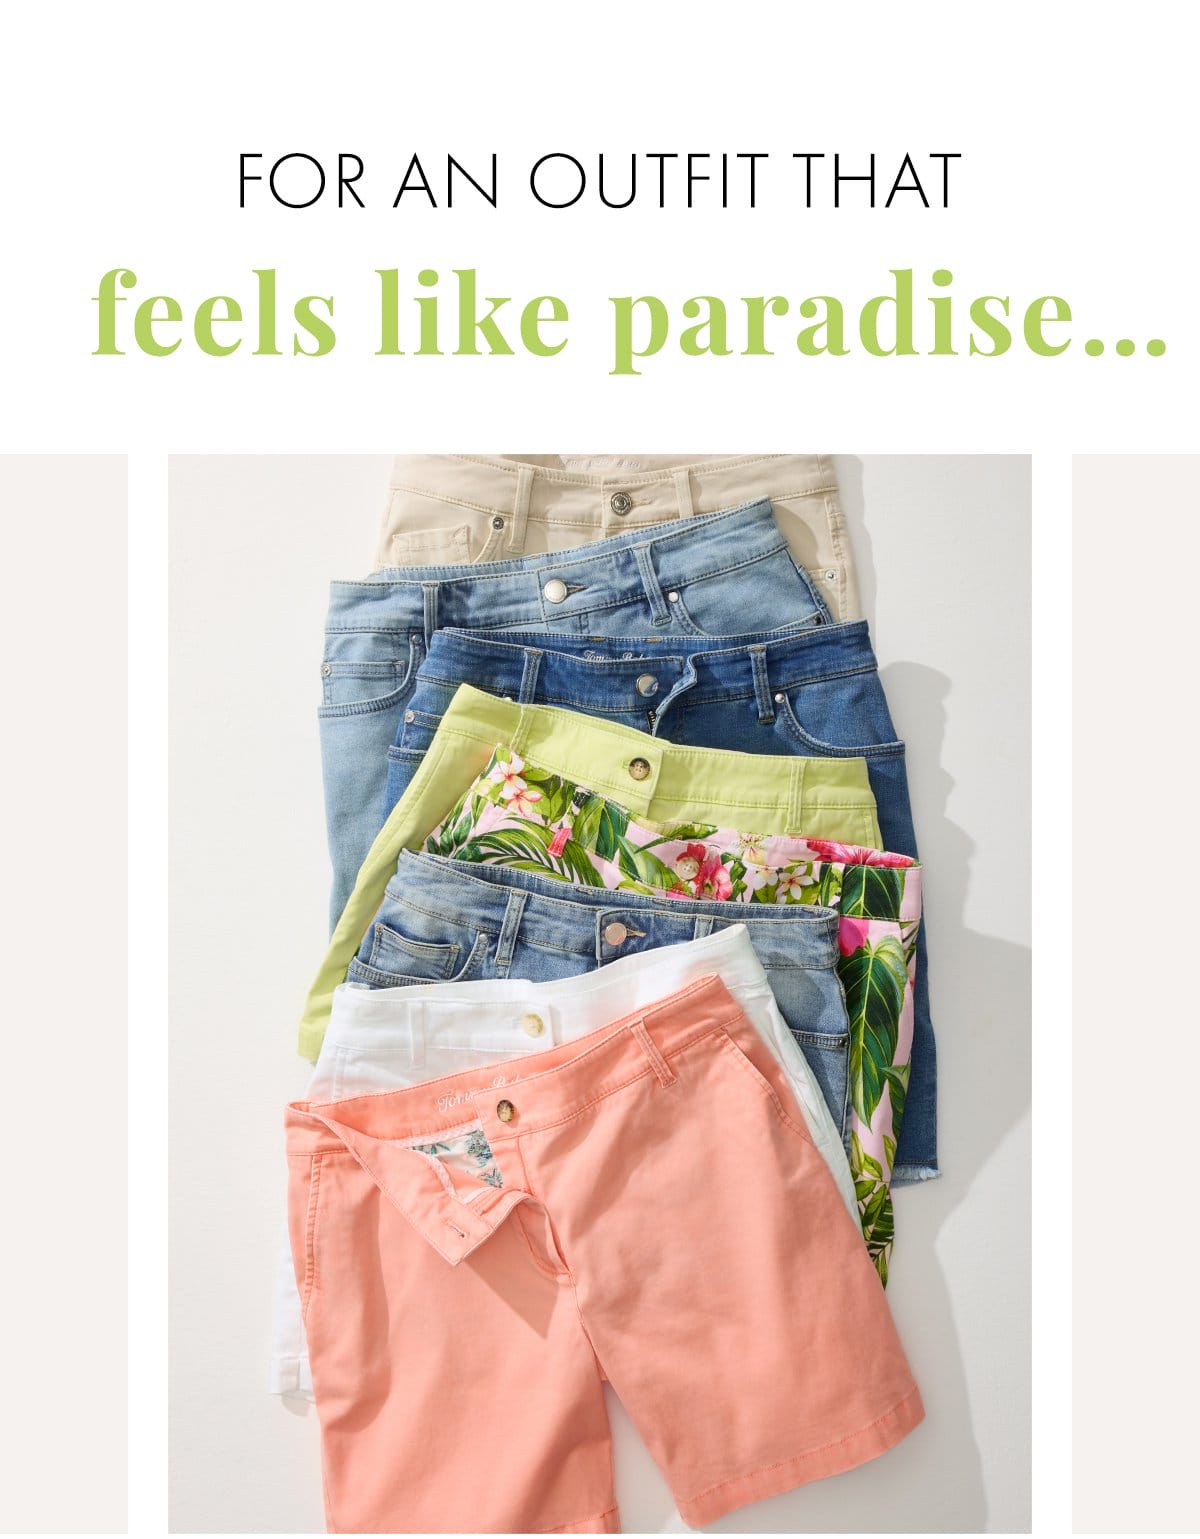 For an outfit that feels like paradise...